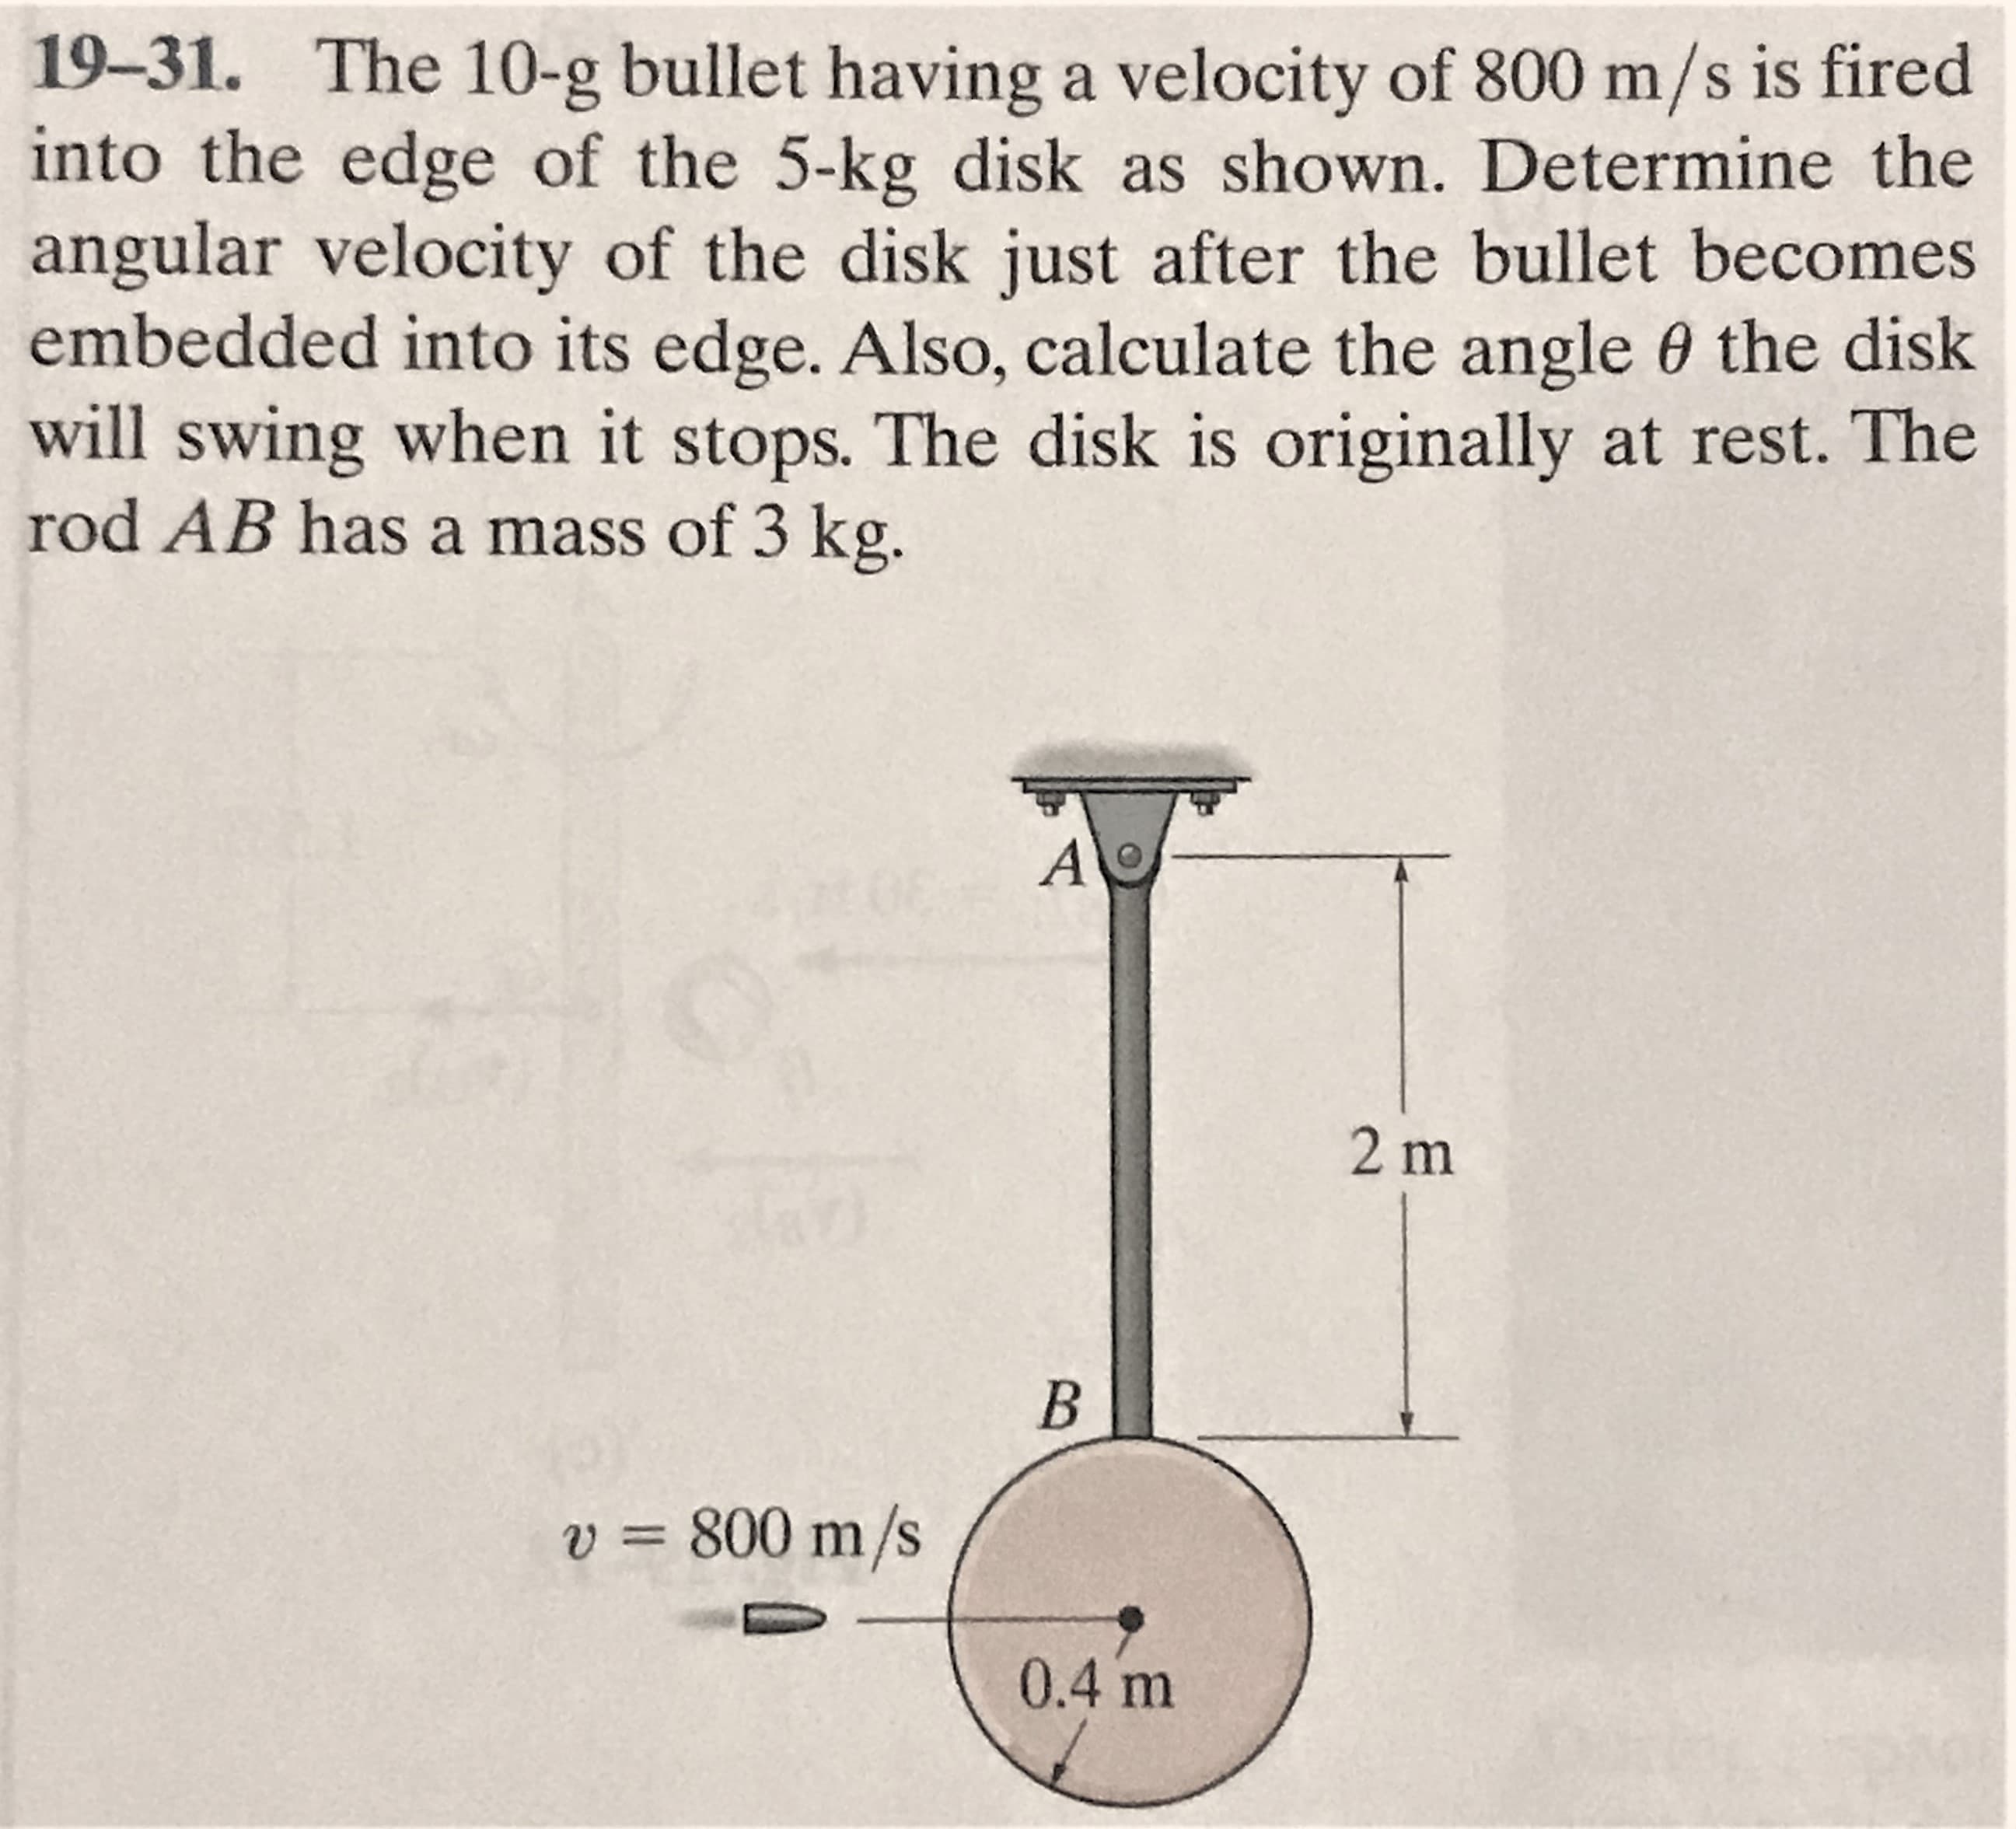 19-31. The 10-g bullet having a velocity of 800 m/s is fired
into the edge of the 5-kg disk as shown. Determine the
angular velocity of the disk just after the bullet becomes
embedded into its edge. Also, calculate the angle 0 the disk
will swing when it stops. The disk is originally at rest. The
rod AB has a mass of 3 kg.
2 m
v = 800 m/s
%3D
0.4 m
